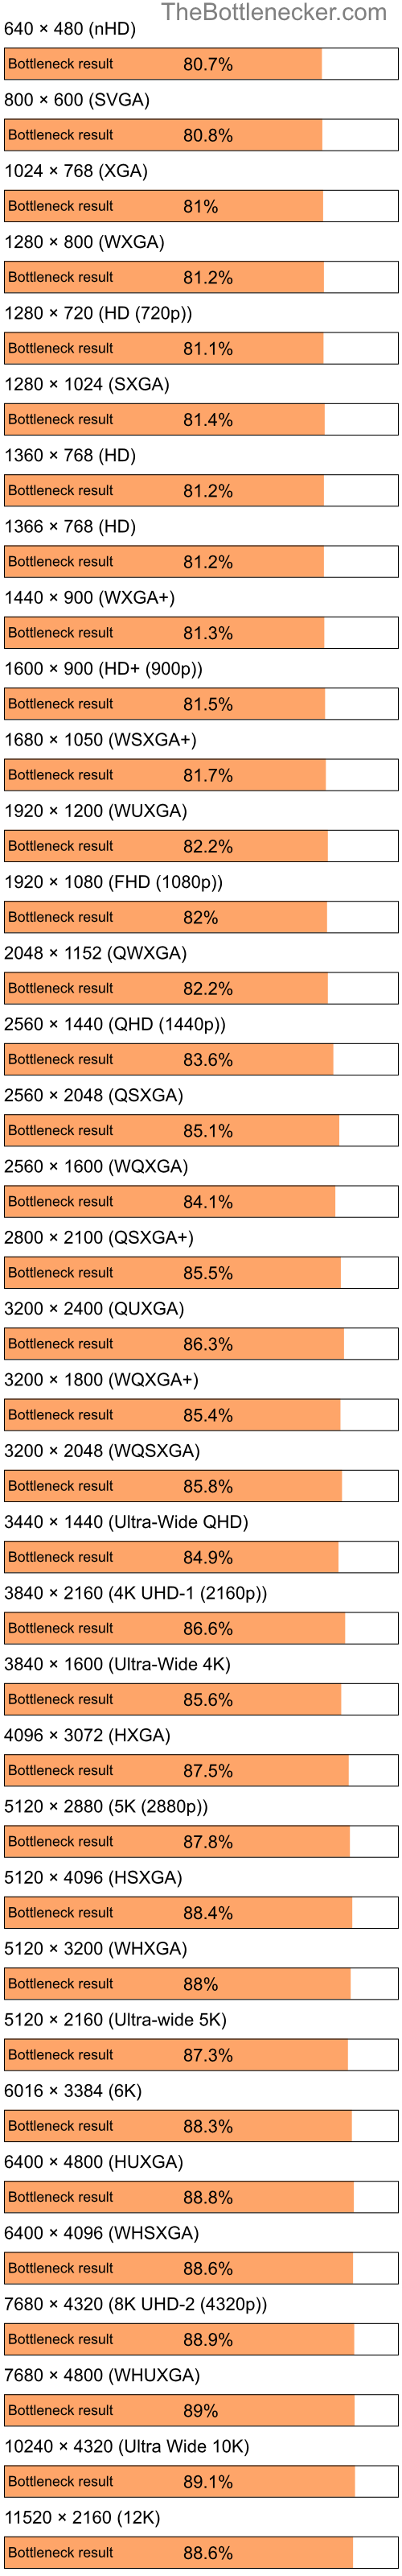 Bottleneck results by resolution for Intel Celeron and NVIDIA nForce 630i in Graphic Card Intense Tasks